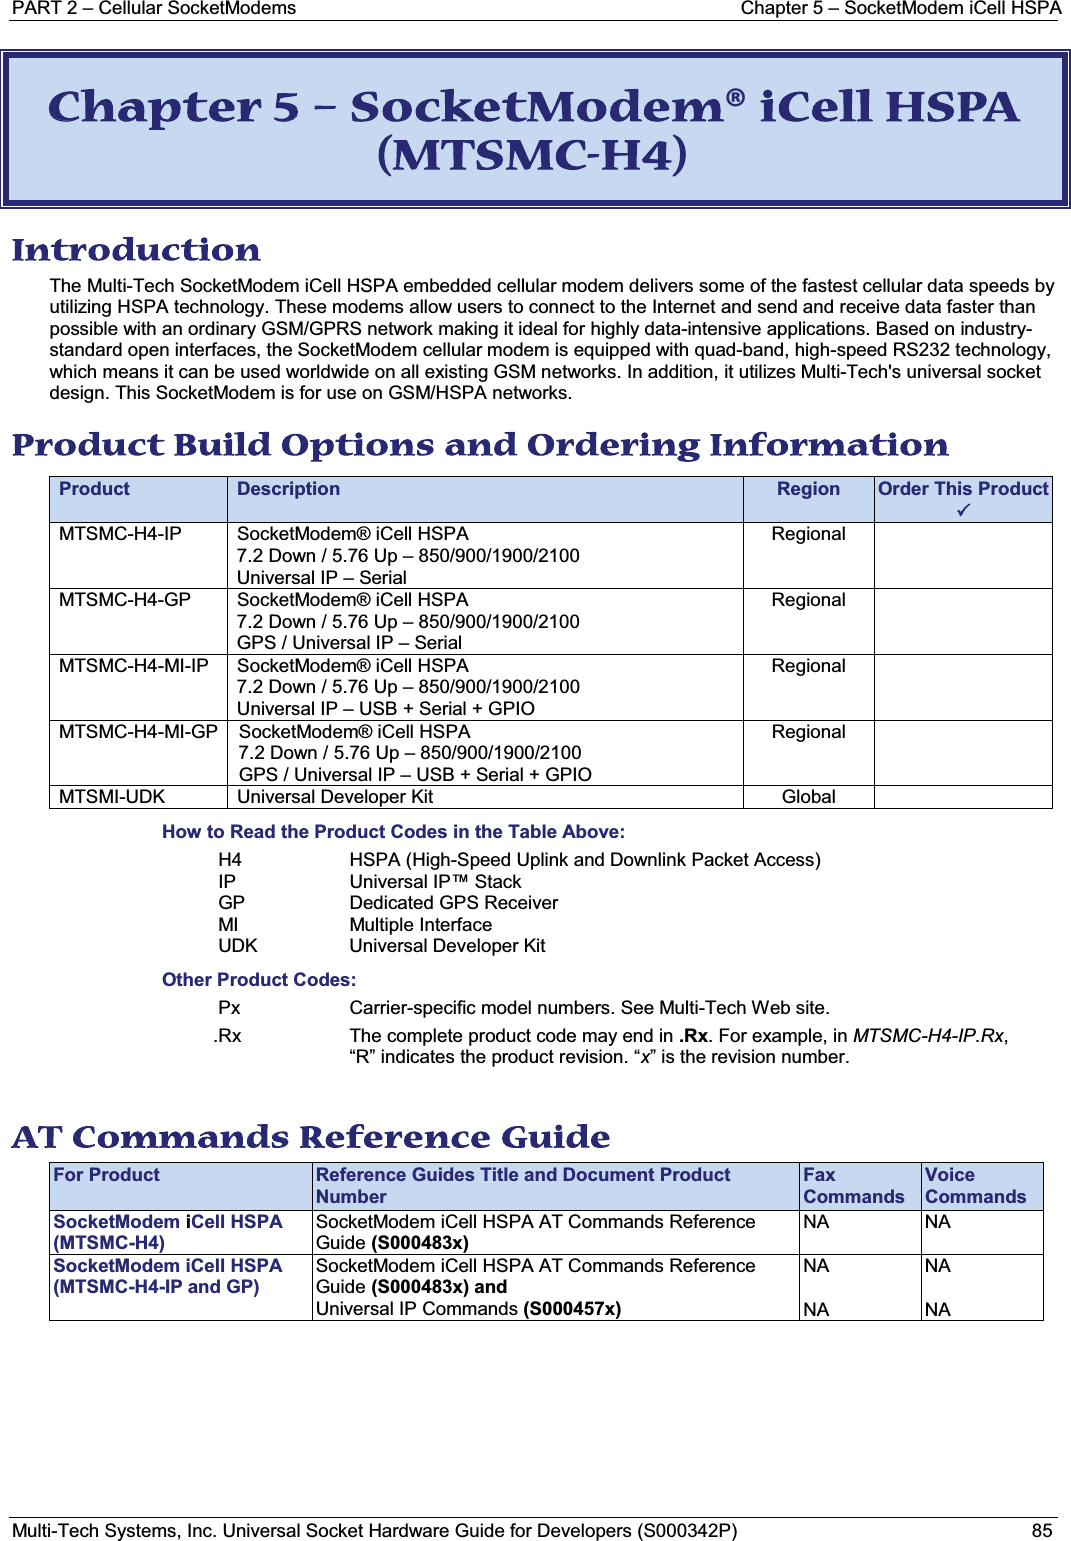 PART 2 – Cellular SocketModems Chapter 5 – SocketModem iCell HSPAMulti-Tech Systems, Inc. Universal Socket Hardware Guide for Developers (S000342P) 85CChapter 5 – SocketModem® iCell HSPA (MTSMC-H4) Introduction The Multi-Tech SocketModem iCell HSPA embedded cellular modem delivers some of the fastest cellular data speeds by utilizing HSPA technology. These modems allow users to connect to the Internet and send and receive data faster than possible with an ordinary GSM/GPRS network making it ideal for highly data-intensive applications. Based on industry-standard open interfaces, the SocketModem cellular modem is equipped with quad-band, high-speed RS232 technology, which means it can be used worldwide on all existing GSM networks. In addition, it utilizes Multi-Tech&apos;s universal socket design. This SocketModem is for use on GSM/HSPA networks.Product Build Options and Ordering Information Product Description Region Order This Product3 MTSMC-H4-IP SocketModem® iCell HSPA 7.2 Down / 5.76 Up – 850/900/1900/2100Universal IP – SerialRegionalMTSMC-H4-GP SocketModem® iCell HSPA 7.2 Down / 5.76 Up – 850/900/1900/2100GPS / Universal IP – SerialRegionalMTSMC-H4-MI-IP SocketModem® iCell HSPA 7.2 Down / 5.76 Up – 850/900/1900/2100Universal IP – USB + Serial + GPIORegionalMTSMC-H4-MI-GP SocketModem® iCell HSPA 7.2 Down / 5.76 Up – 850/900/1900/2100GPS / Universal IP – USB + Serial + GPIORegionalMTSMI-UDK Universal Developer Kit GlobalHow to Read the Product Codes in the Table Above:H4 HSPA (High-Speed Uplink and Downlink Packet Access)IP Universal IP™ StackGP Dedicated GPS ReceiverMI Multiple InterfaceUDK Universal Developer KitOther Product Codes:Px Carrier-specific model numbers. See Multi-Tech Web site..Rx The complete product code may end in .Rx. For example, in MTSMC-H4-IP.Rx,“R” indicates the product revision. “x” is the revision number.AT Commands Reference Guide For Product Reference Guides Title and Document Product NumberFax CommandsVoice CommandsSocketModem iCell HSPA(MTSMC-H4)SocketModem iCell HSPA AT Commands Reference Guide (S000483x)NA NASocketModem iCell HSPA(MTSMC-H4-IP and GP)SocketModem iCell HSPA AT Commands Reference Guide (S000483x) andUniversal IP Commands (S000457x)NANANANA